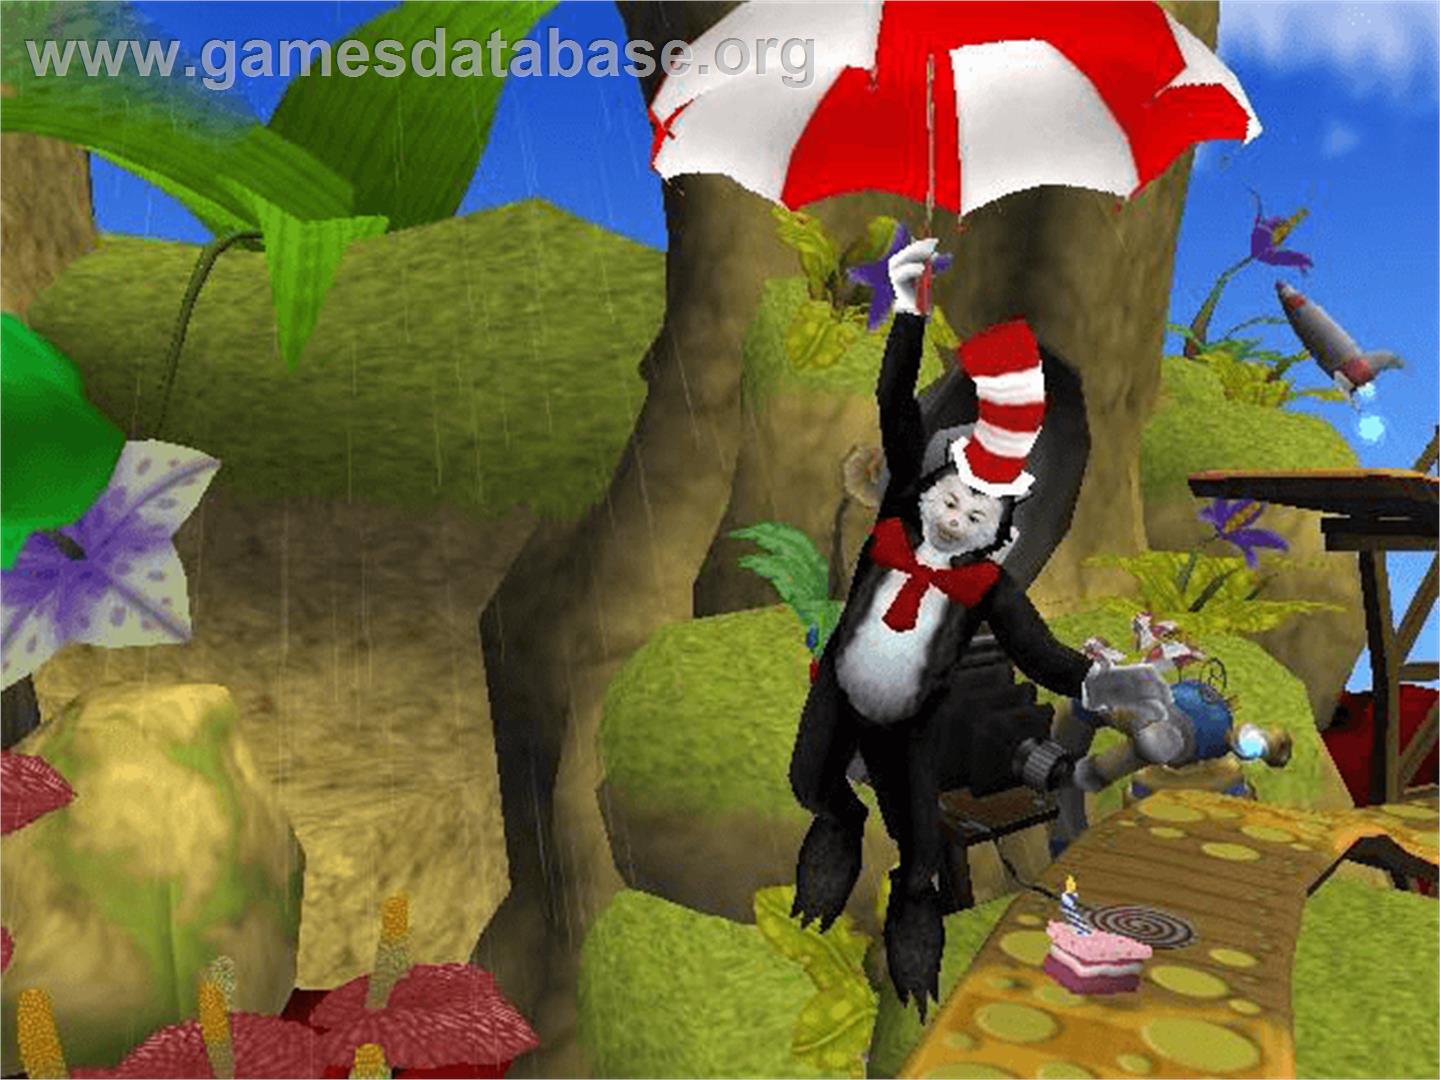 Dr. Seuss' The Cat in the Hat - Microsoft Xbox - Artwork - In Game